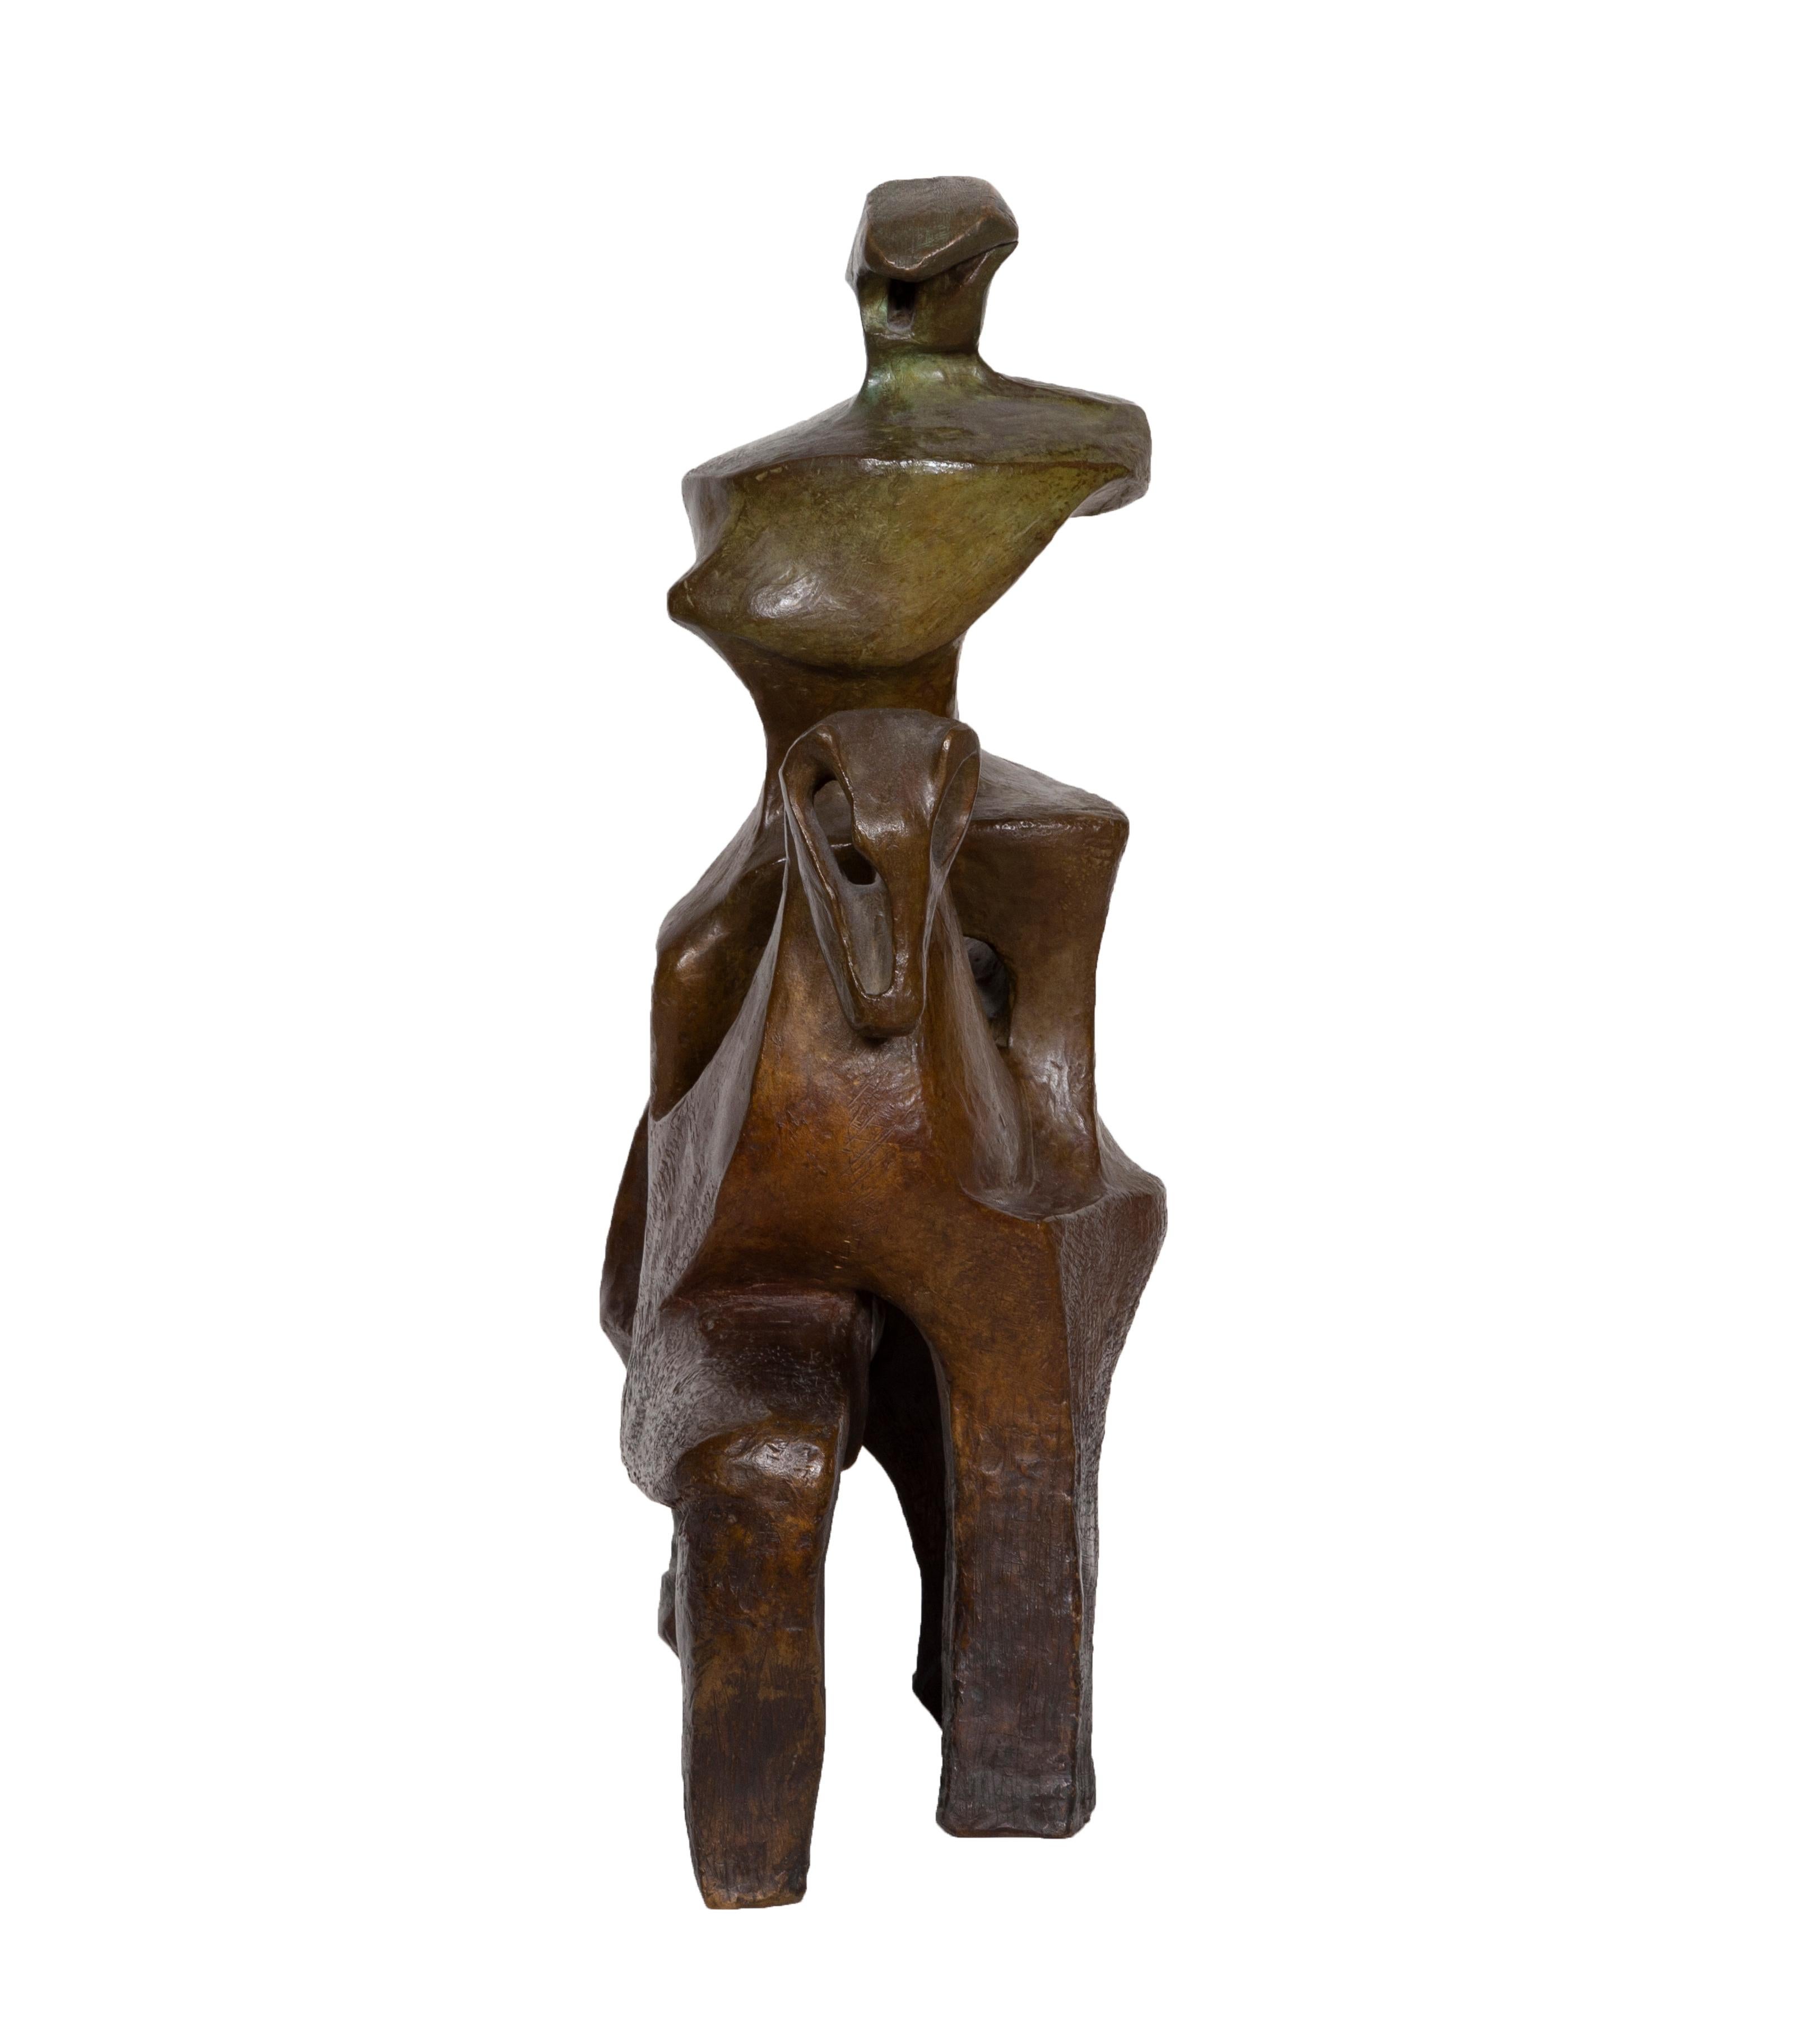 Modern Cubist sculpture by Pearl Amstel of a Horse and Rider. 

Artist: Pearl Amsel (1931 - )
Title: Untitled - Horse and Rider 
Year: 1974
Medium: Bronze Sculpture, signature and date inscribed 
Size: 20 x 13 x 7 inches [50.8 x 33.02 x 17.18 cm]